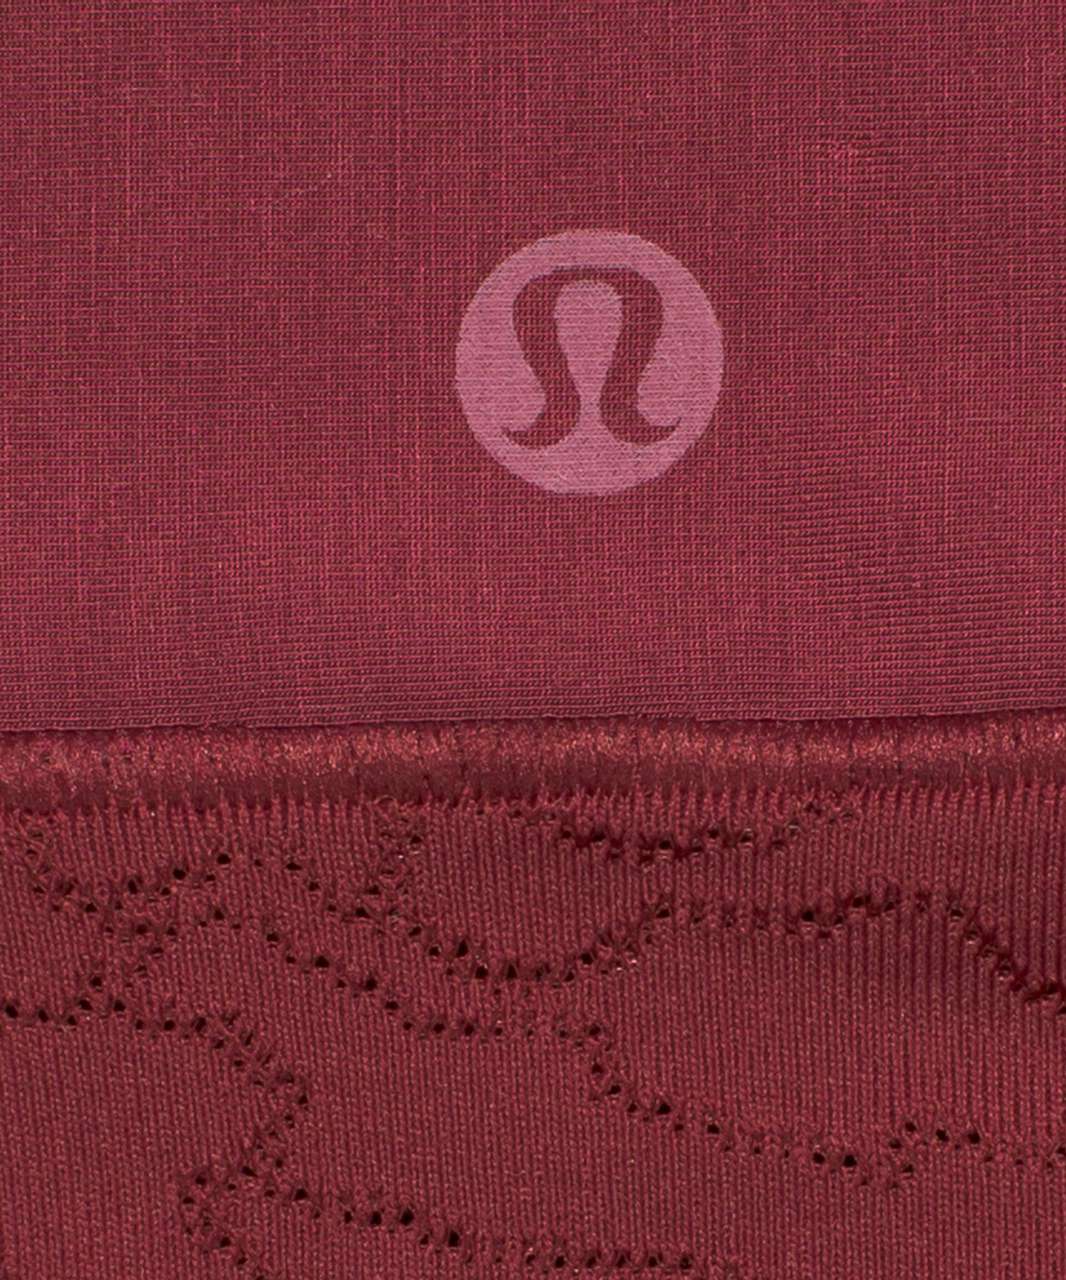 Lululemon UnderEase Mid-Rise Thong Underwear Performance Lace *3 Pack - Black / Lace / Pink Peony / Lace / Mulled Wine / Lace